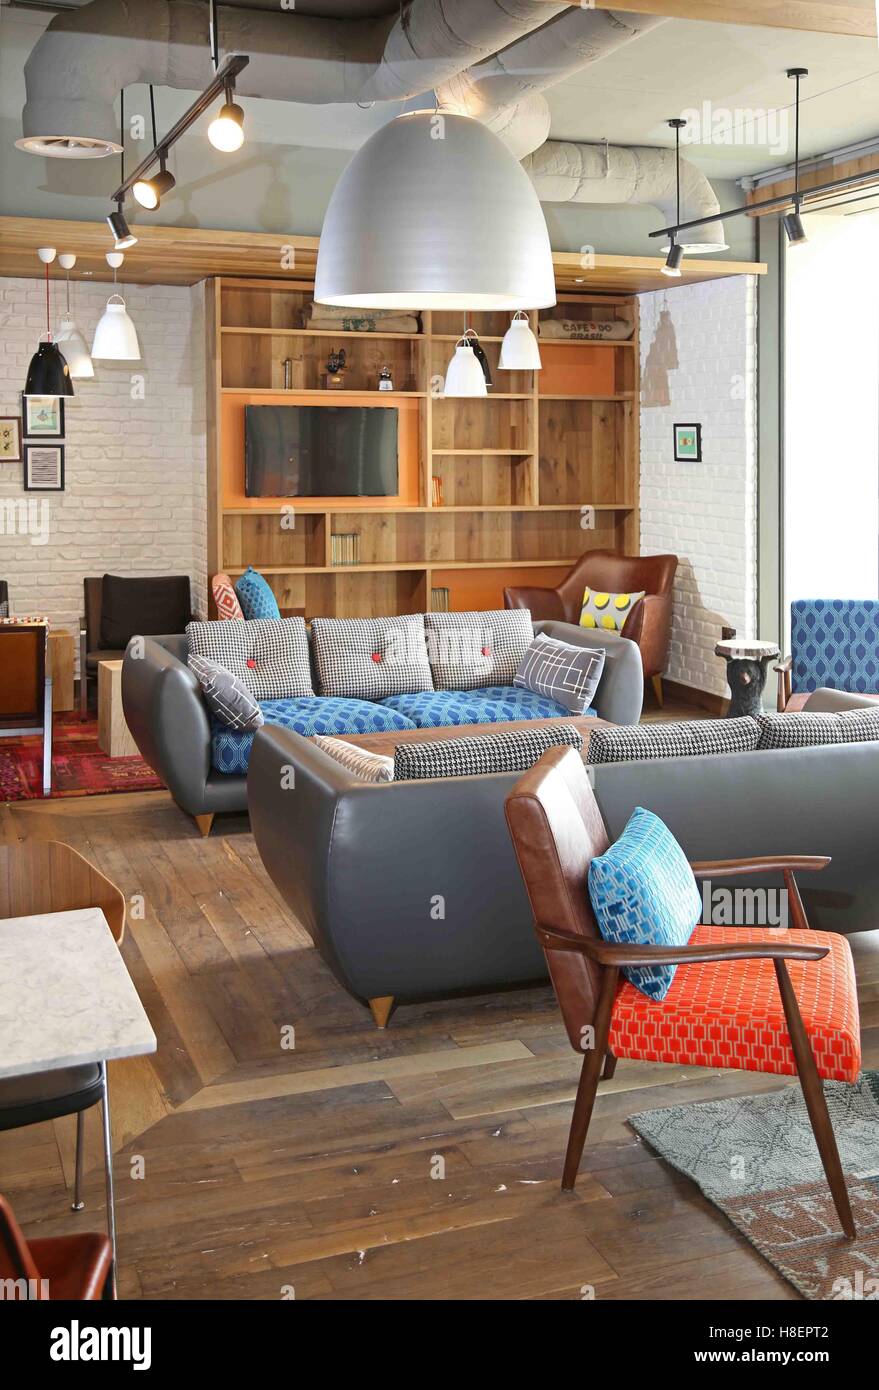 Lounge and reception area in a new Ibis Hotel in Cambridge, UK. Shows vintage style sofas, armchairs tables and shelves Stock Photo